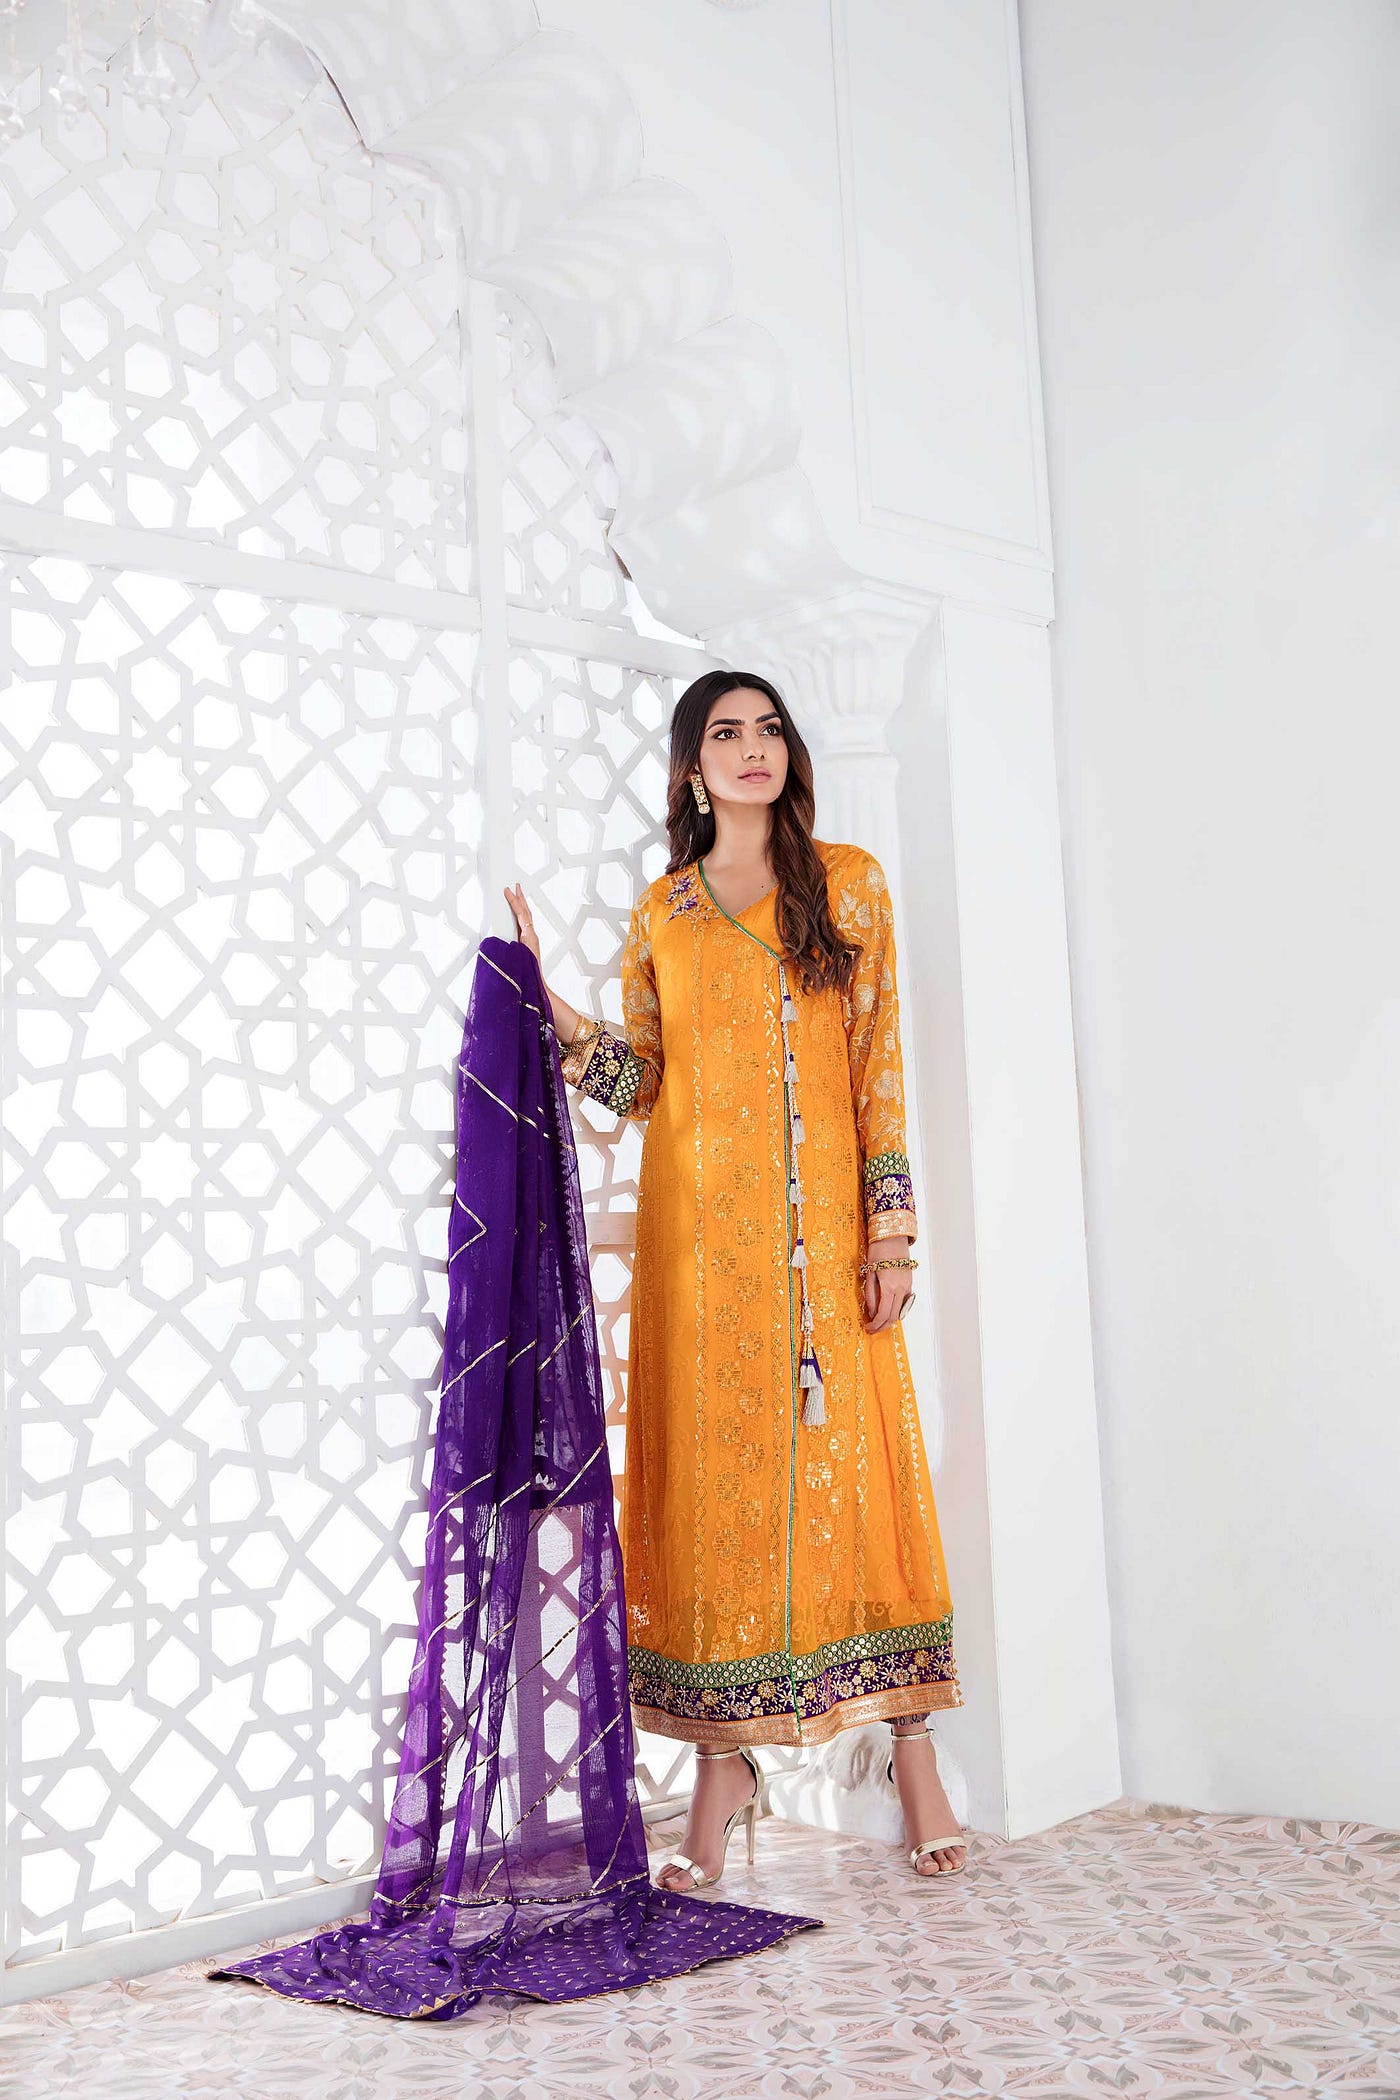 Pakistani Party Dresses. Women from the subcontinent love…